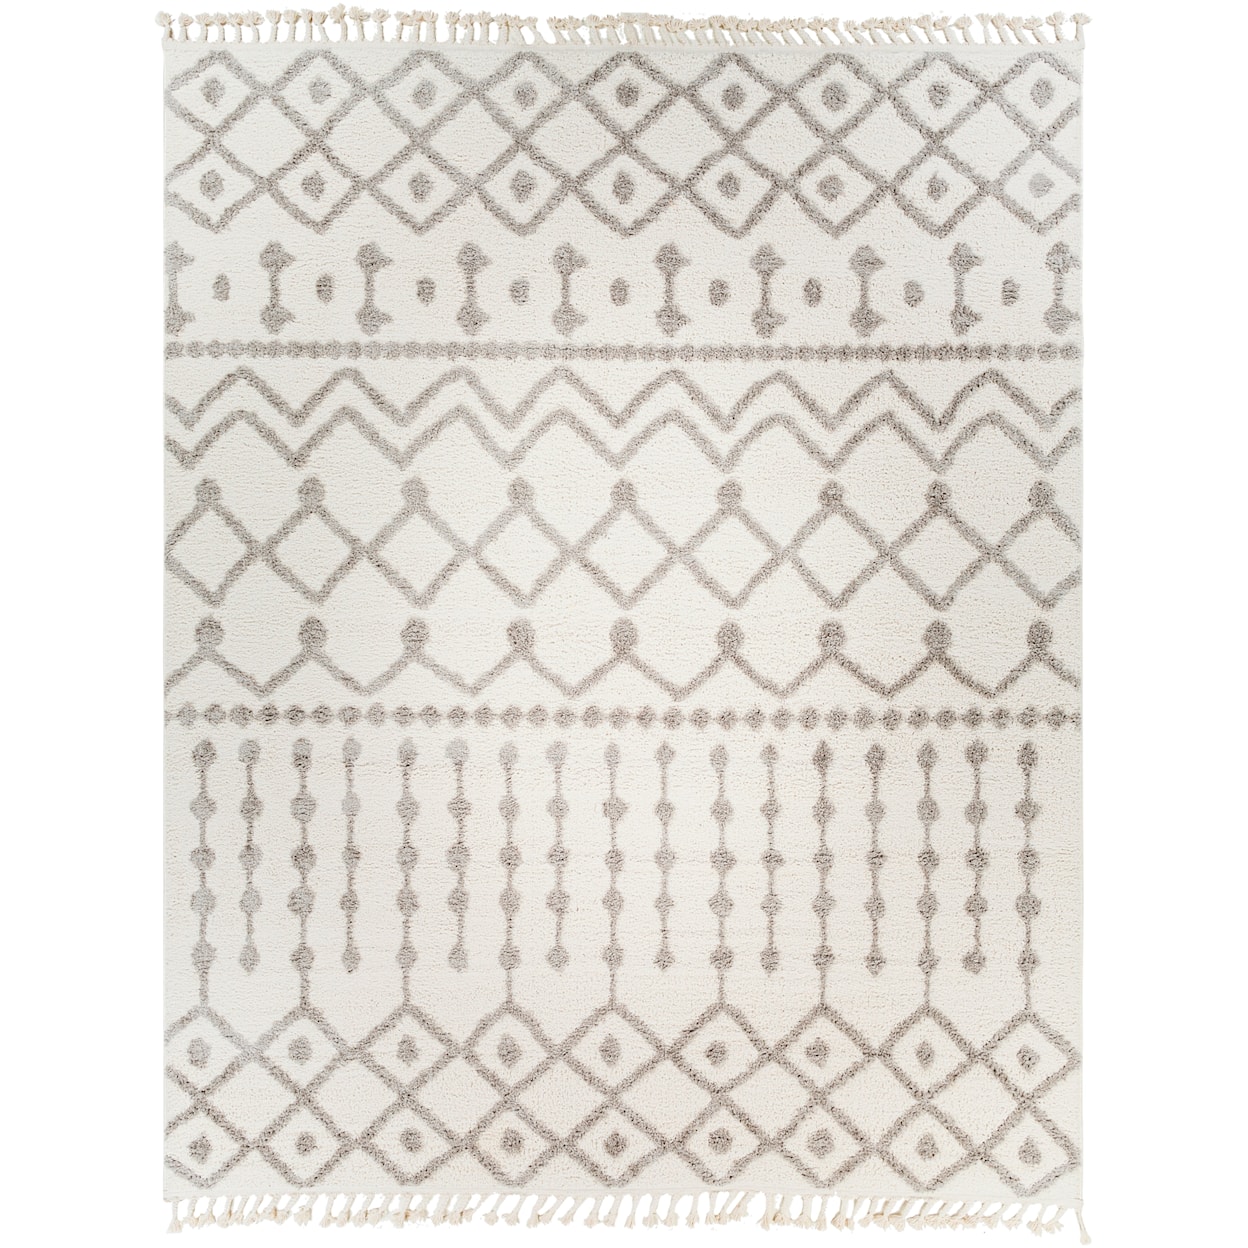 Ruby-Gordon Accents Alhambra Rugs